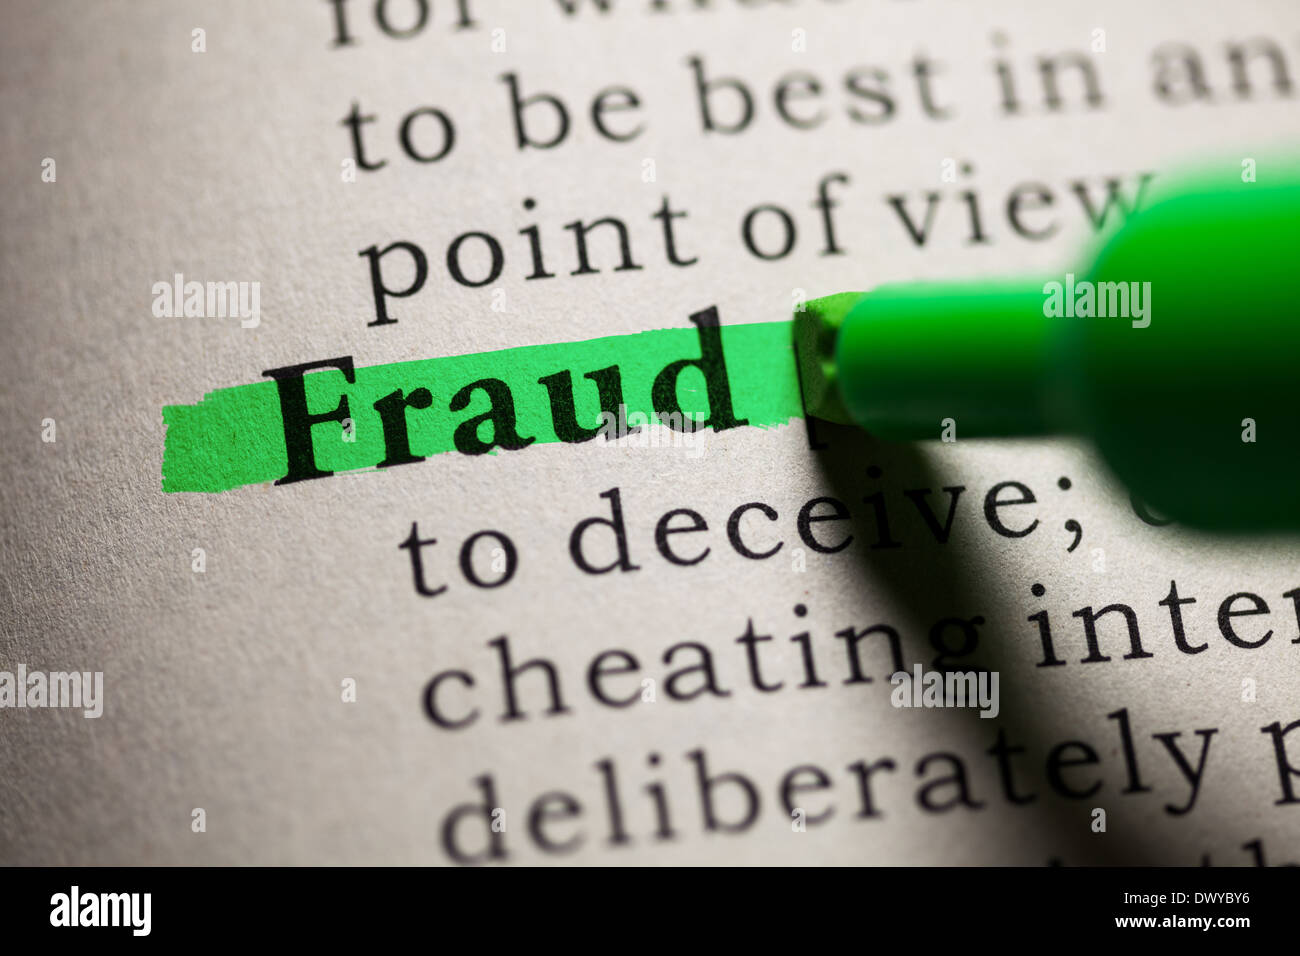 Fake Dictionary, Dictionary definition of the word traitor. including key  descriptive words Stock Photo - Alamy